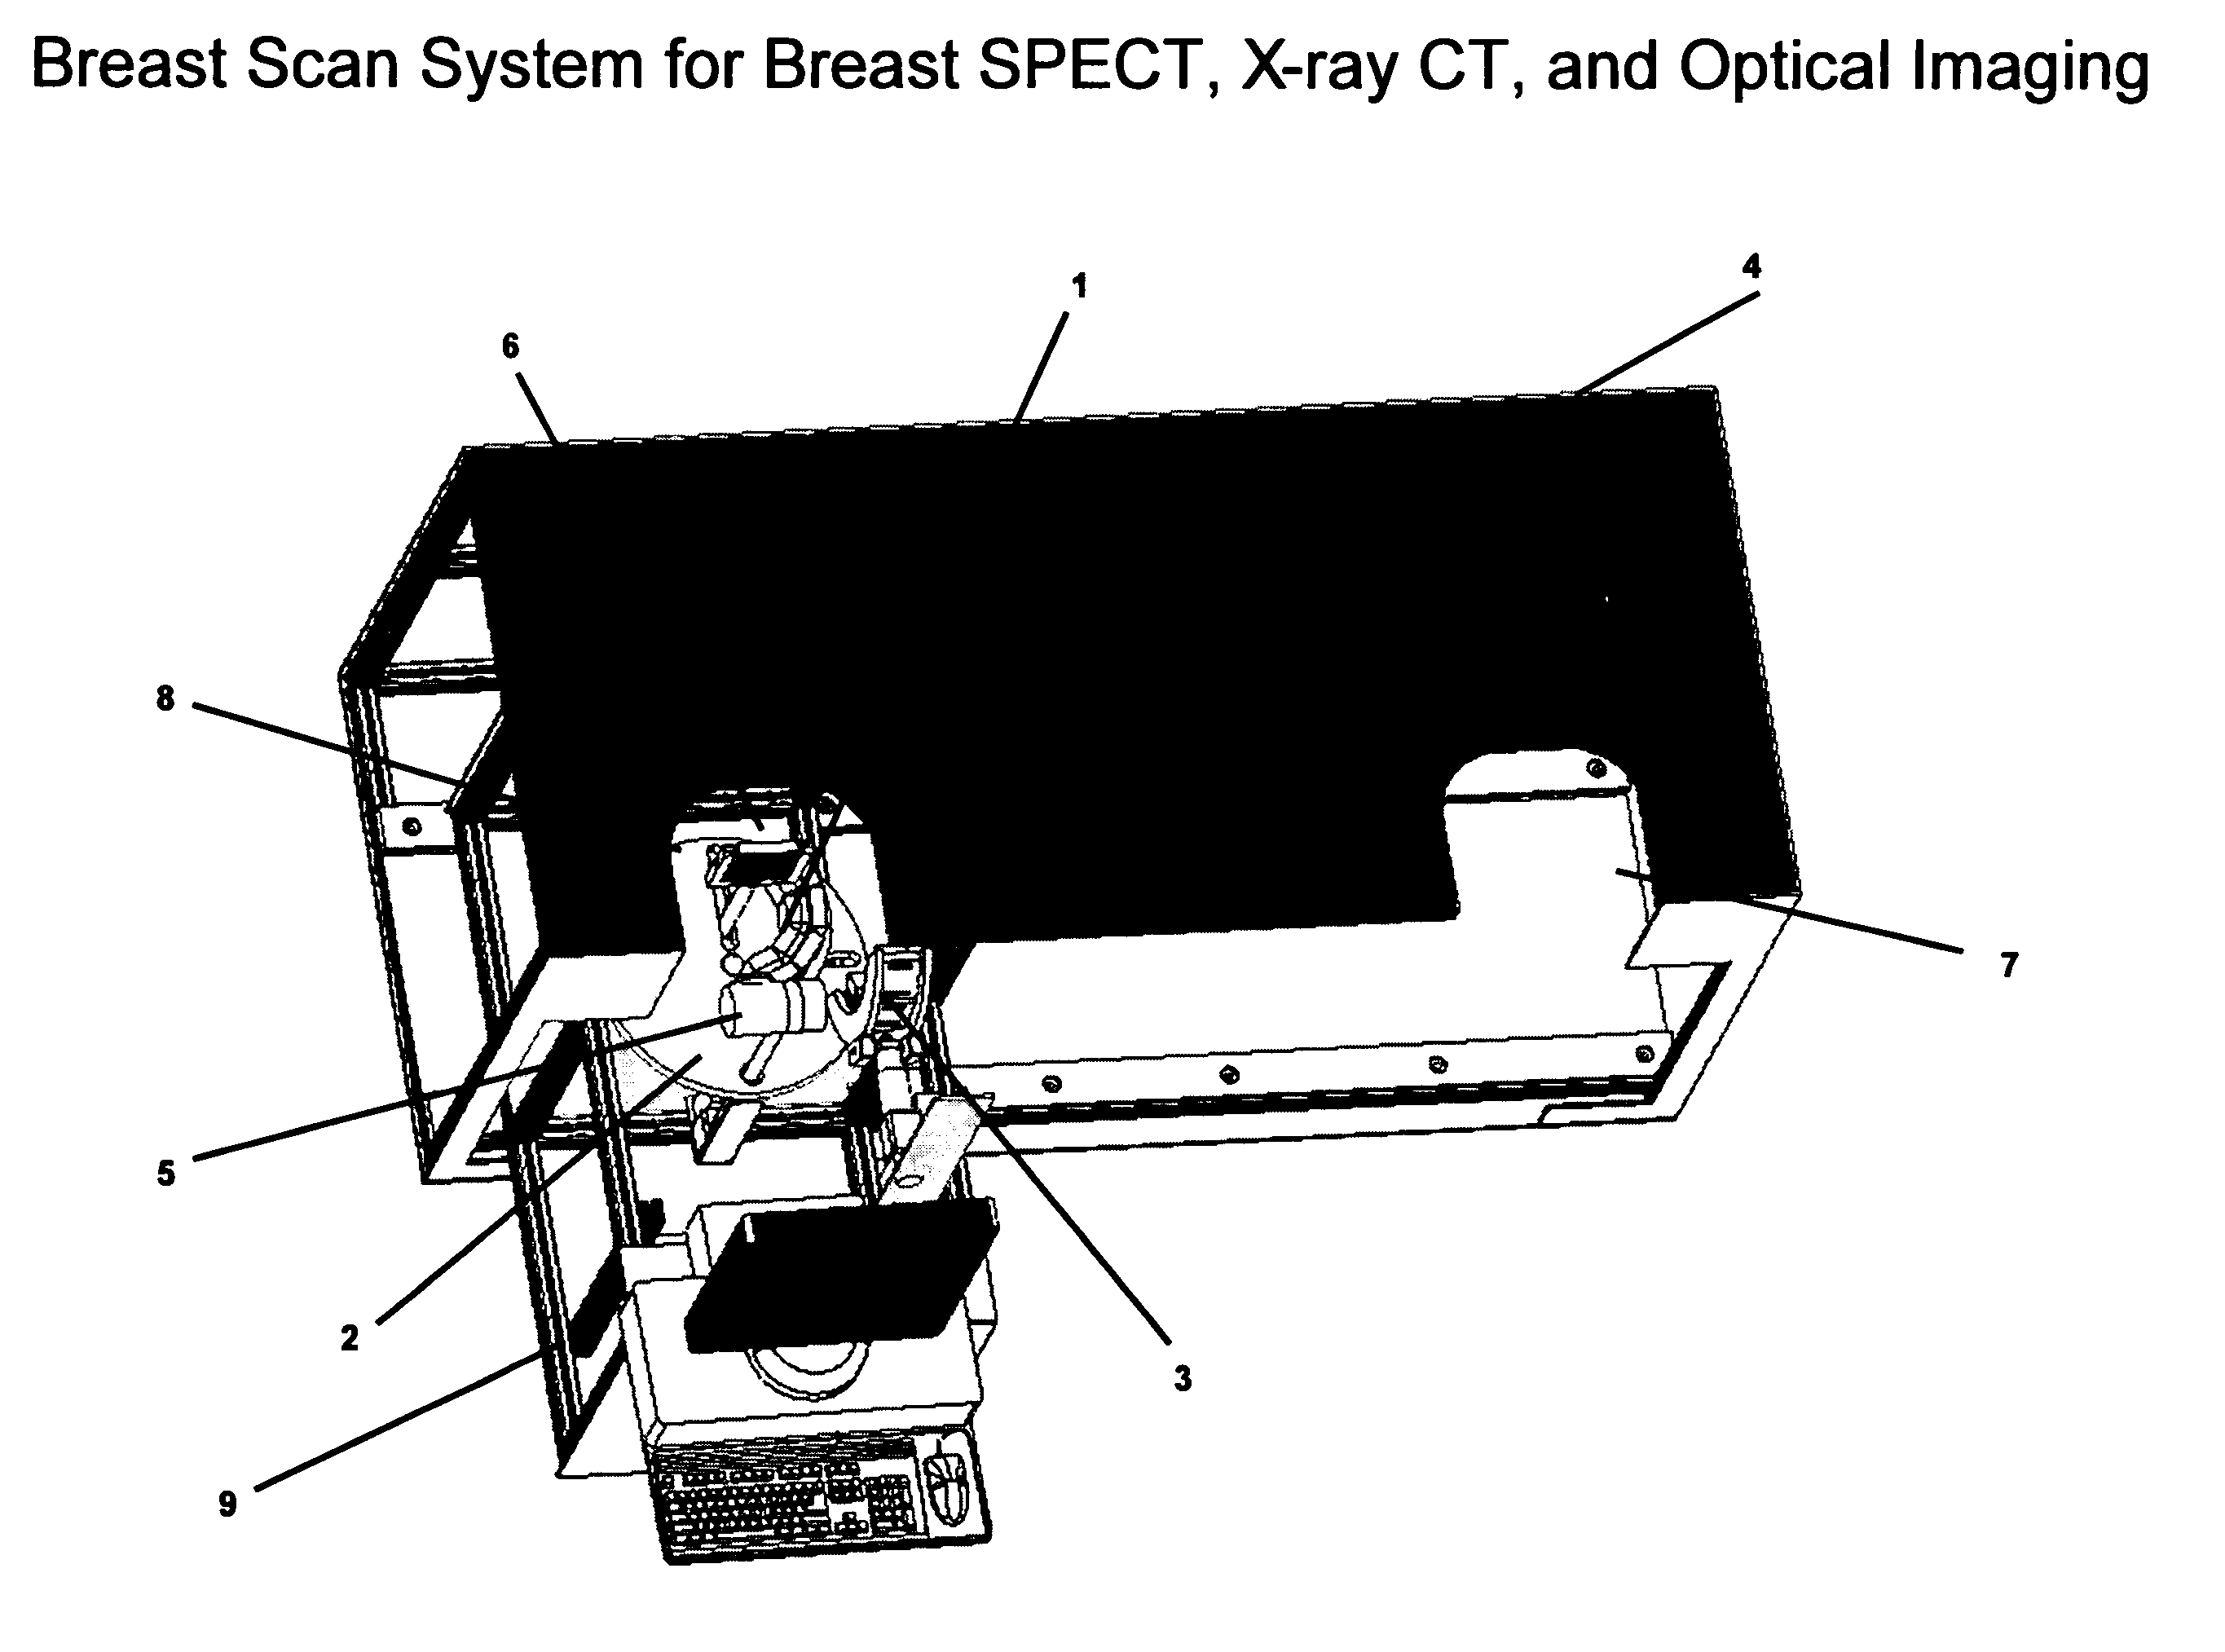 Breast diagnostic apparatus for fused SPECT, PET, x-ray CT, and optical surface imaging of breast cancer